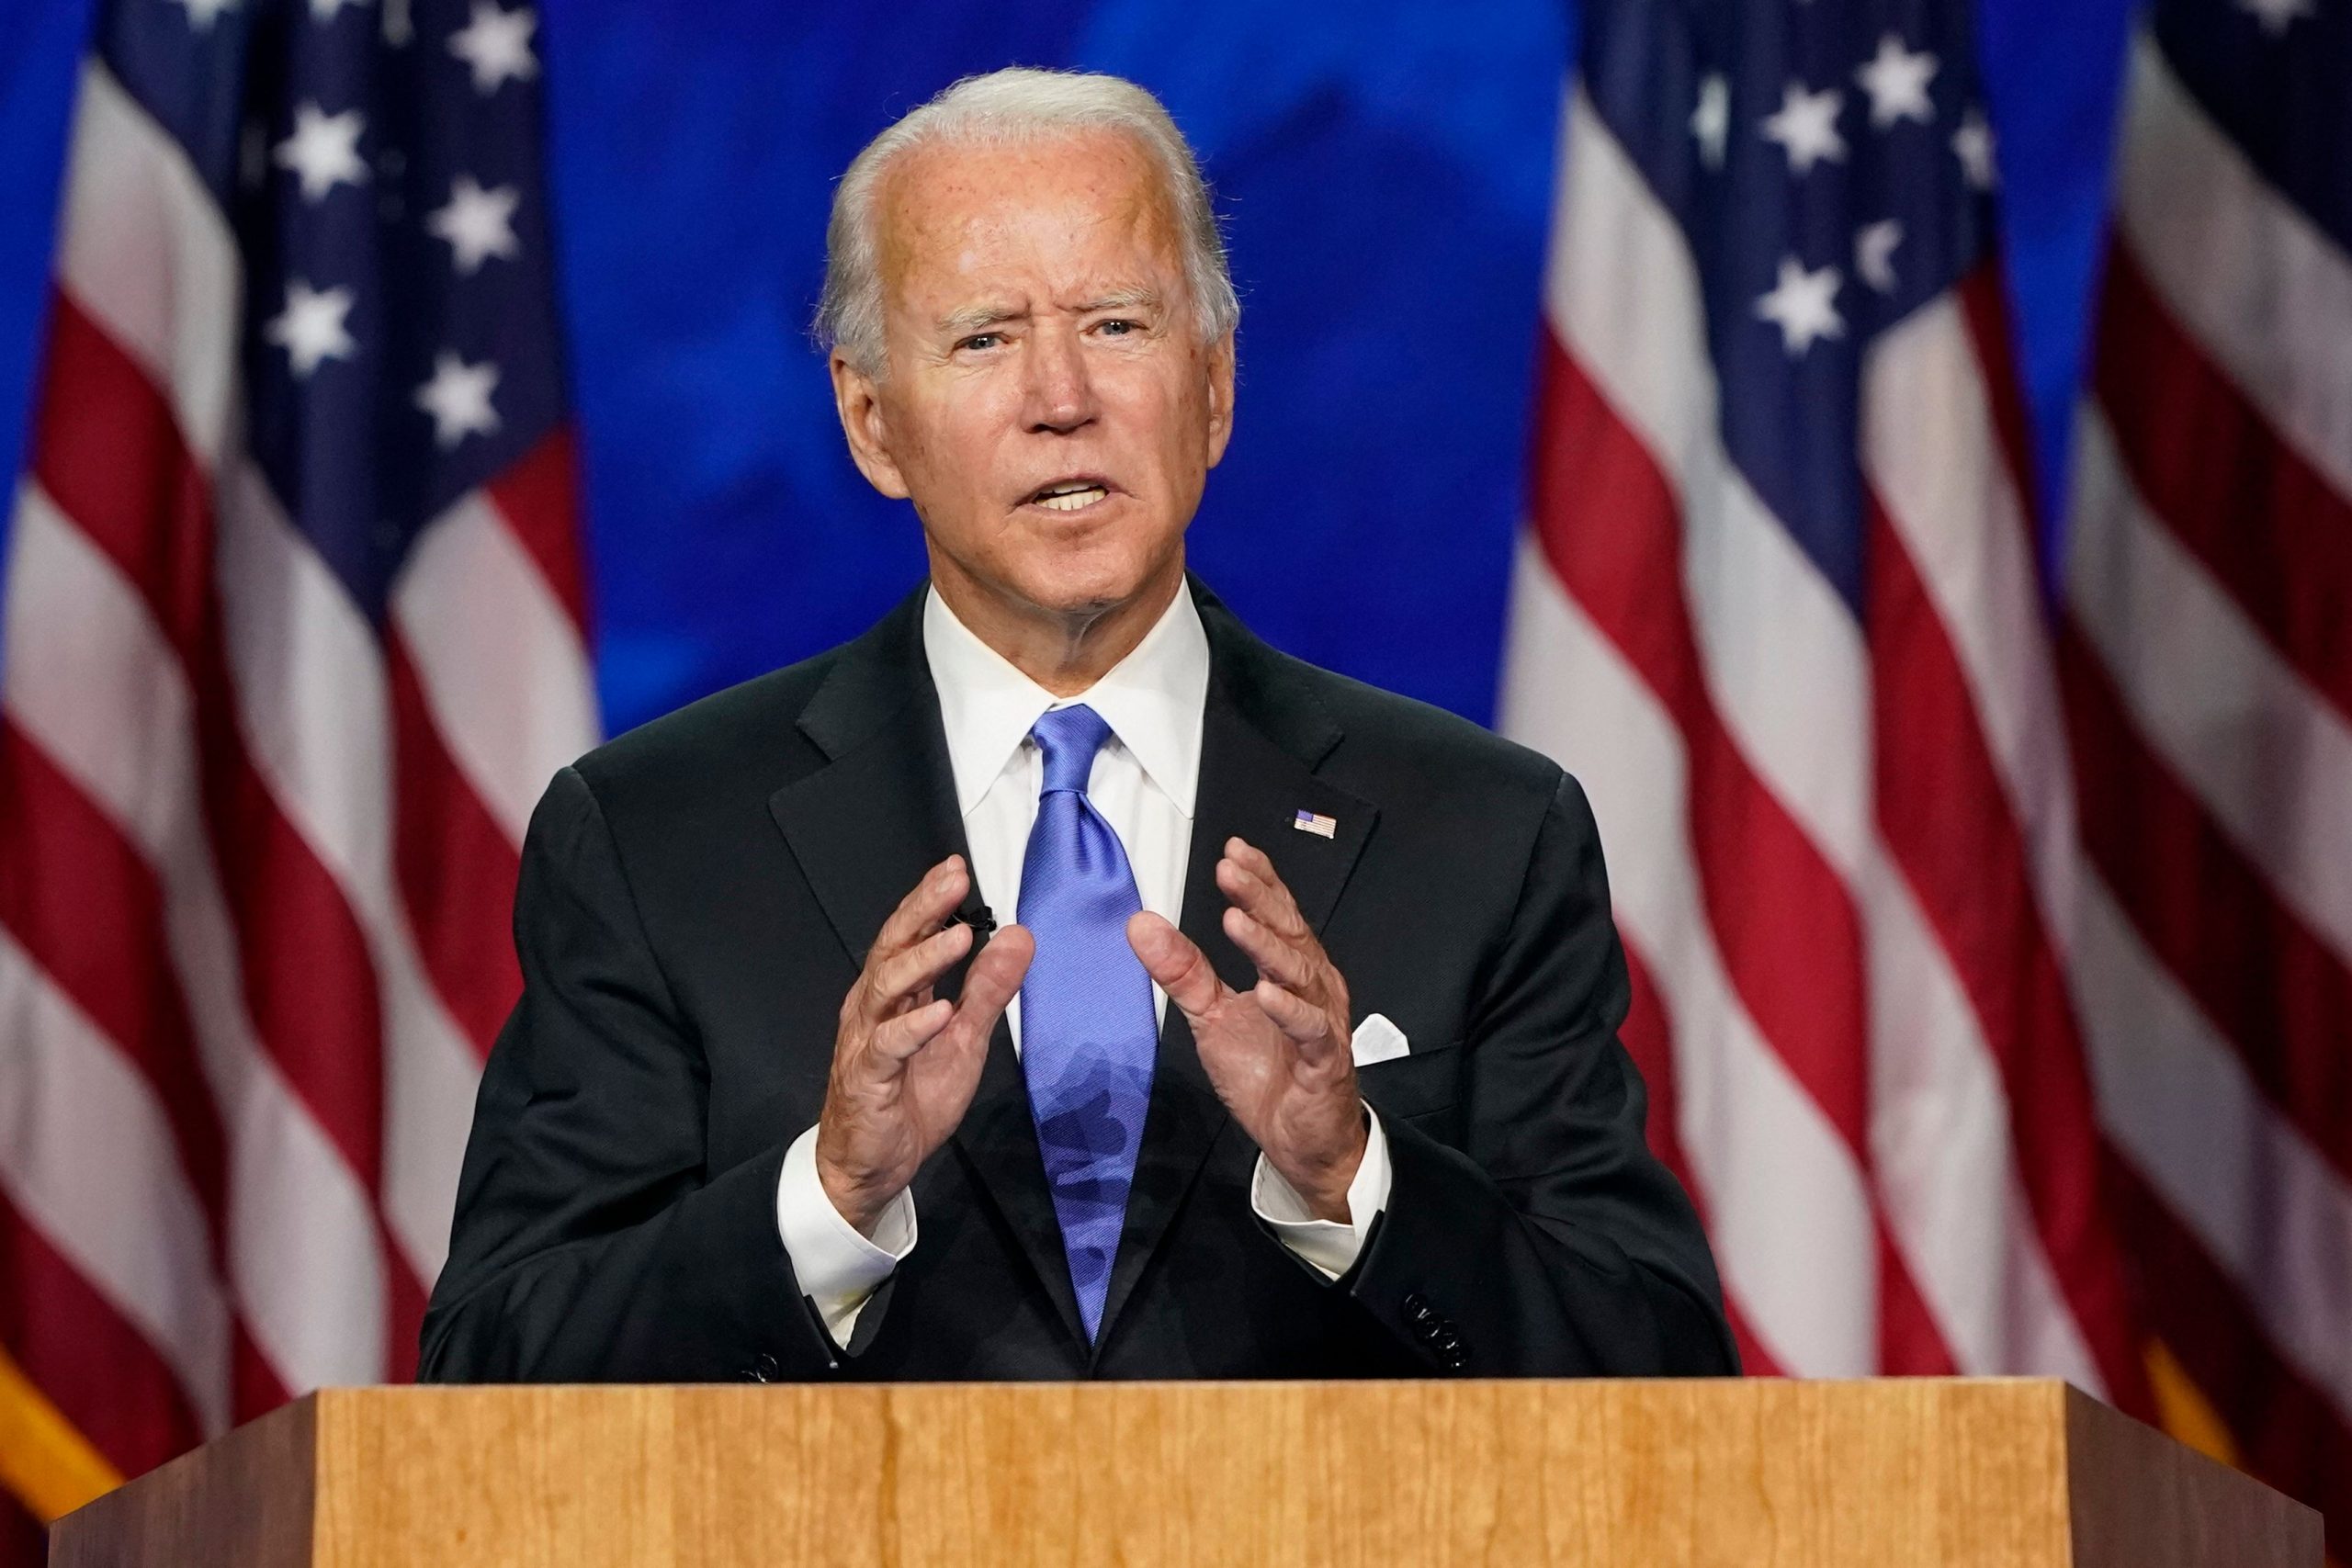 Joe Biden calls for end to ‘lawlessness’ in protest-hit US cities